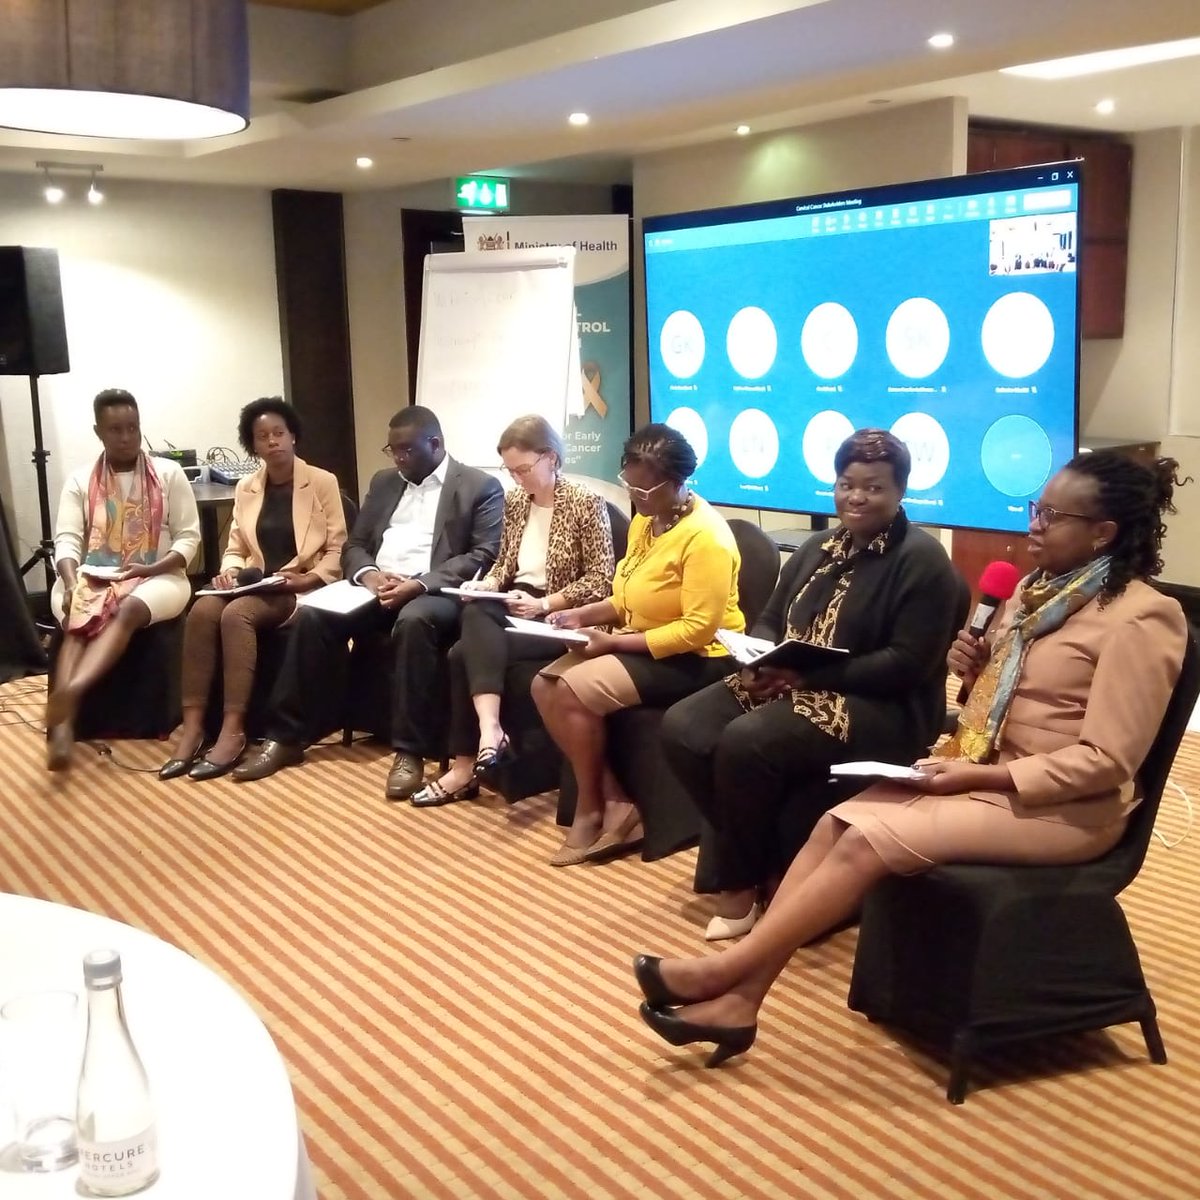 Today, NCCP hosted a successful cervical cancer stakeholders forum! We shared our strategic direction, assessed progress in cervical cancer elimination, and outlined key priorities for future engagement. 
#StopCervicalCancer